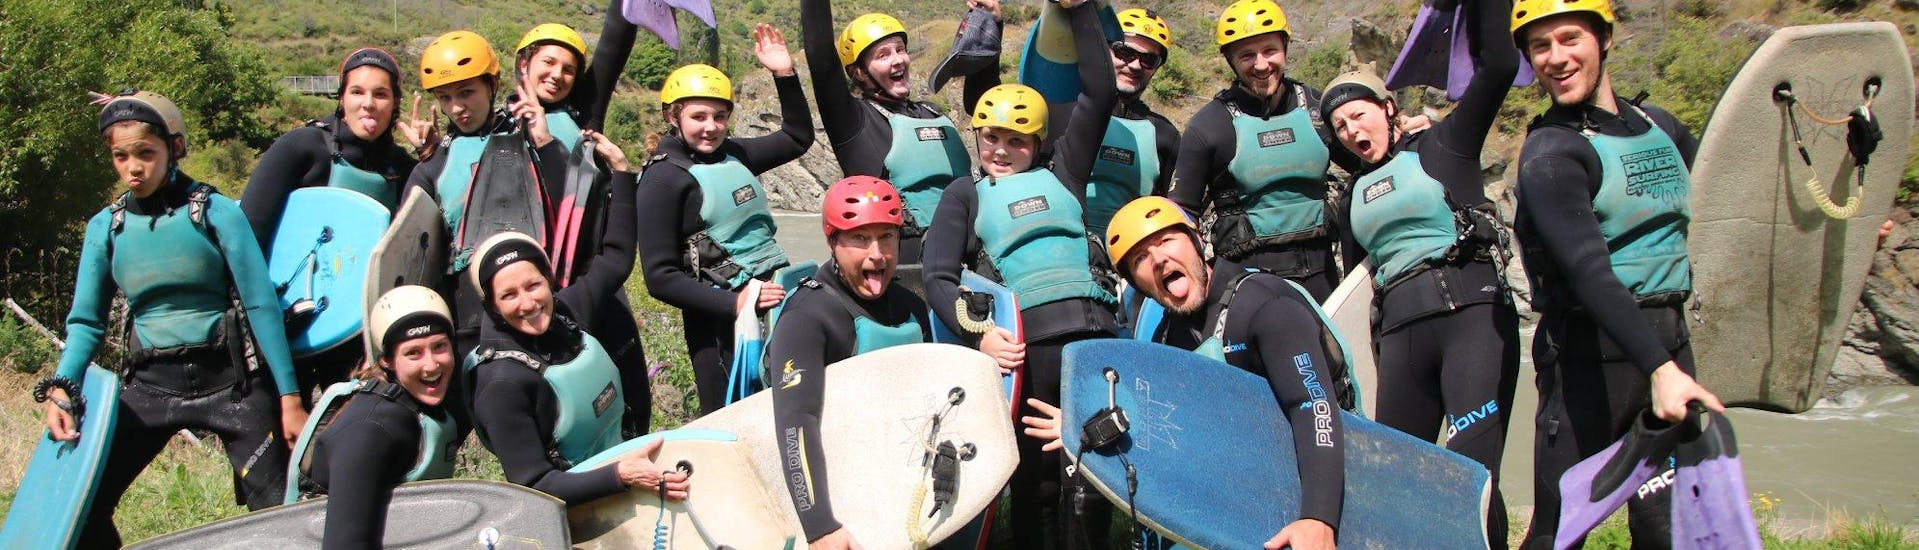 Riversurfing on the Kawarau River for Families